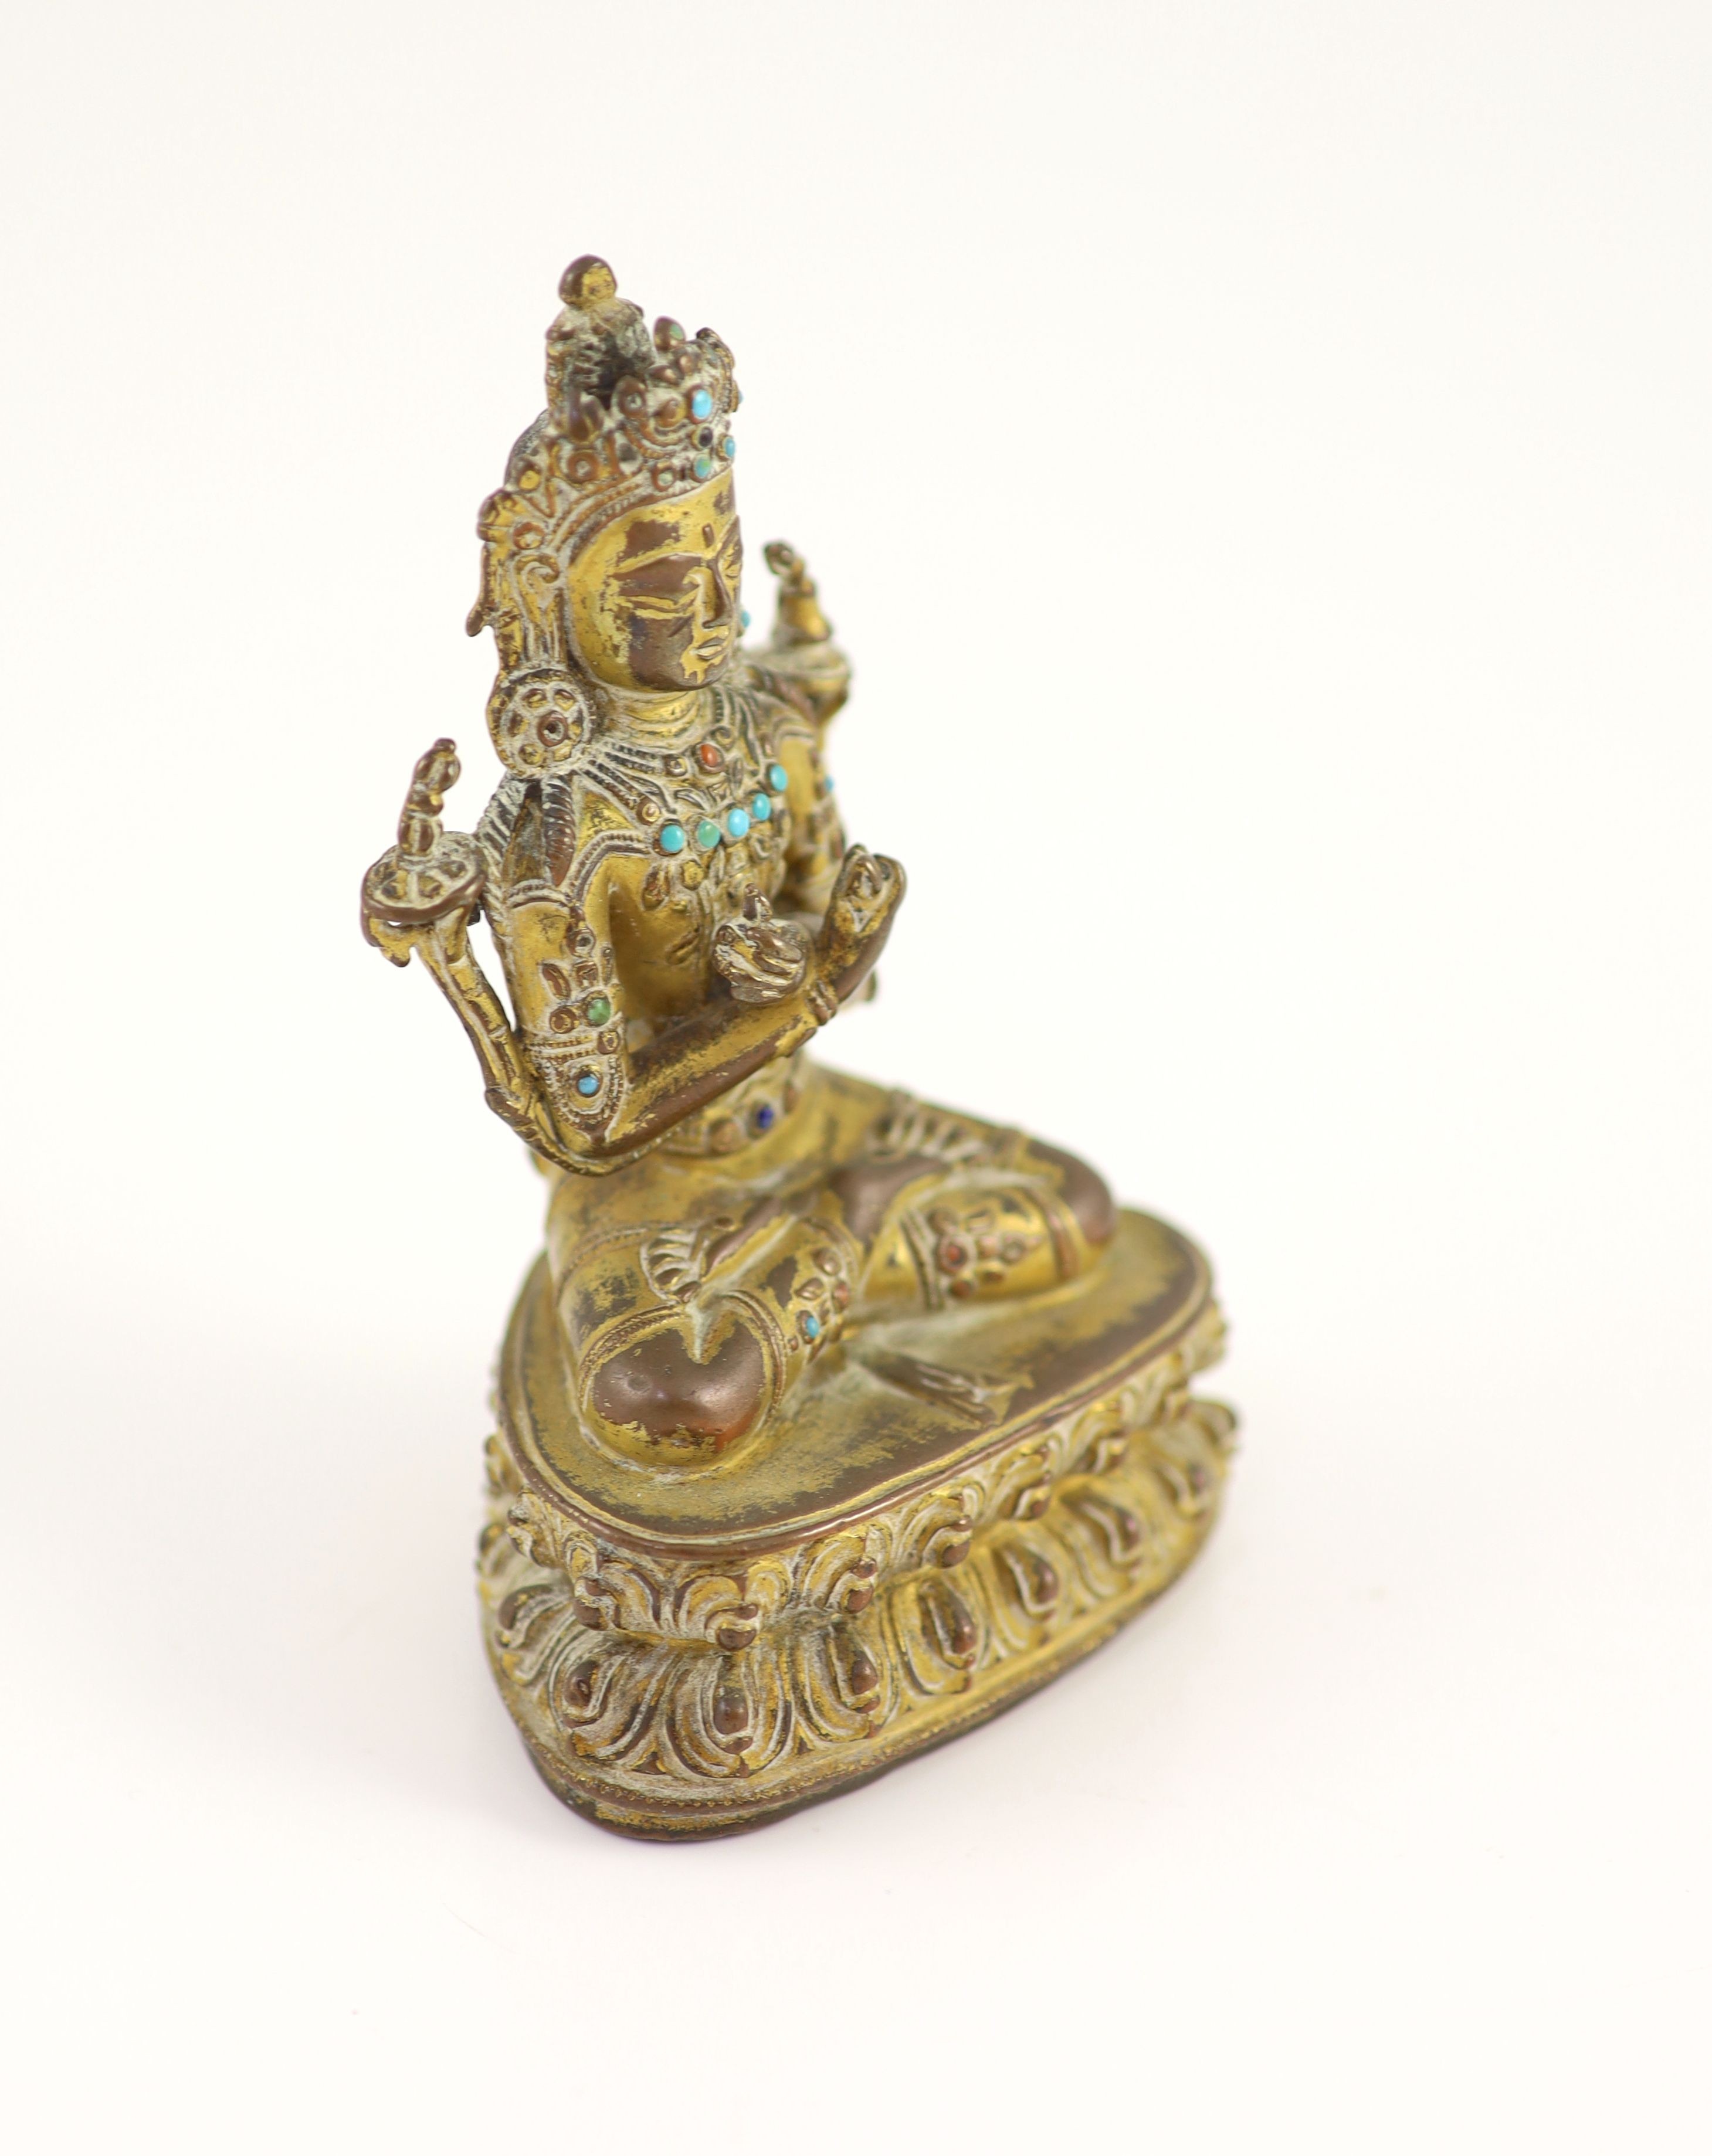 A Tibetan gilt copper alloy seated figure of Maitreya, possibly 15th century, 11.5 cm high